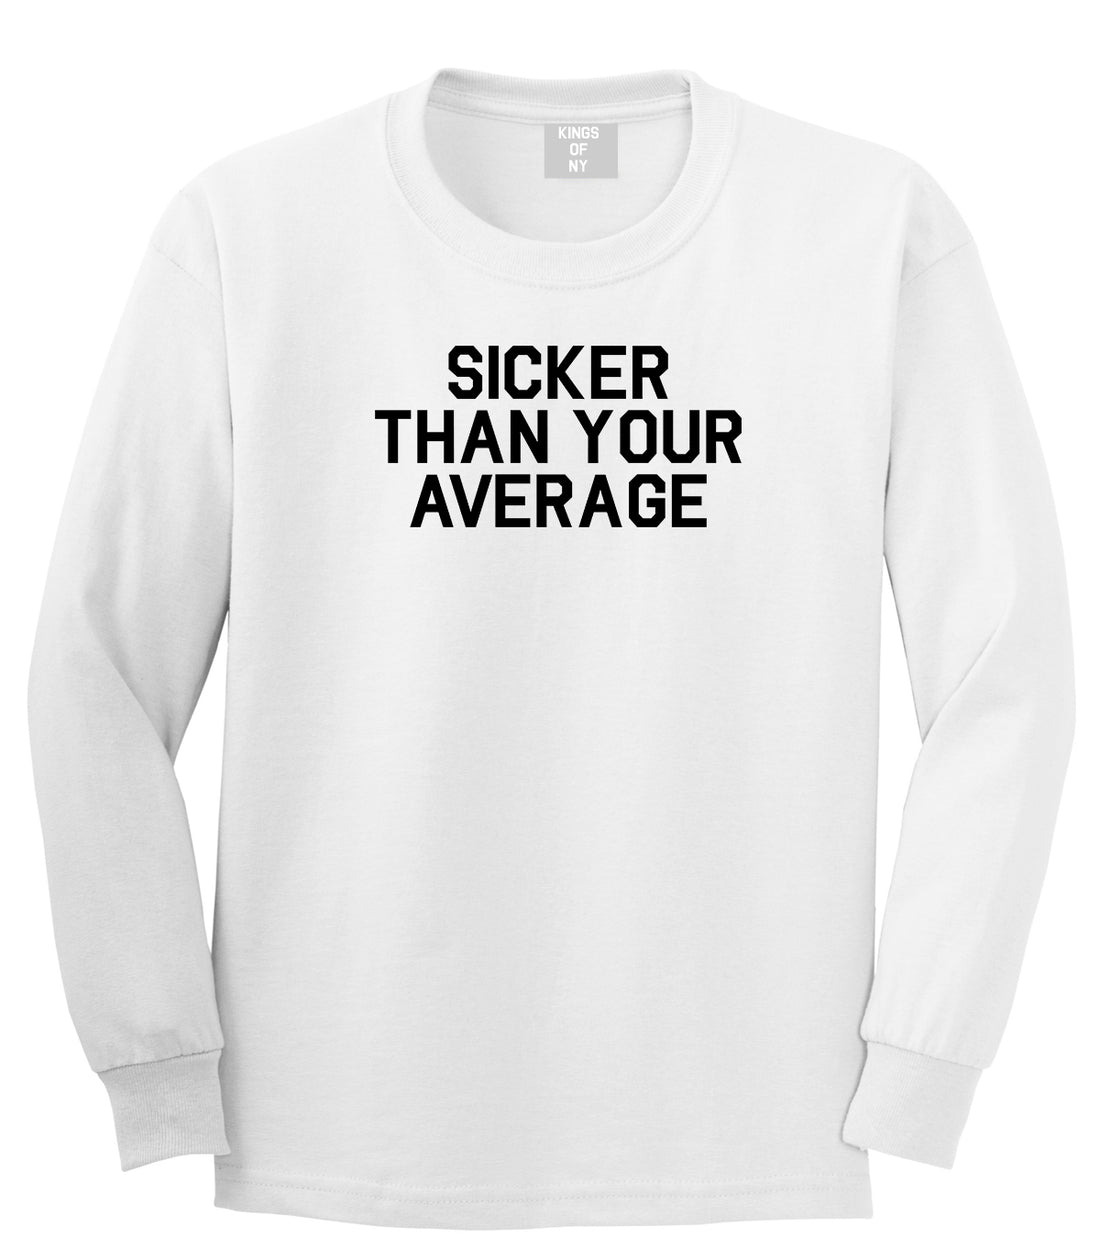 Sicker Than Your Average Long Sleeve T-Shirt in White